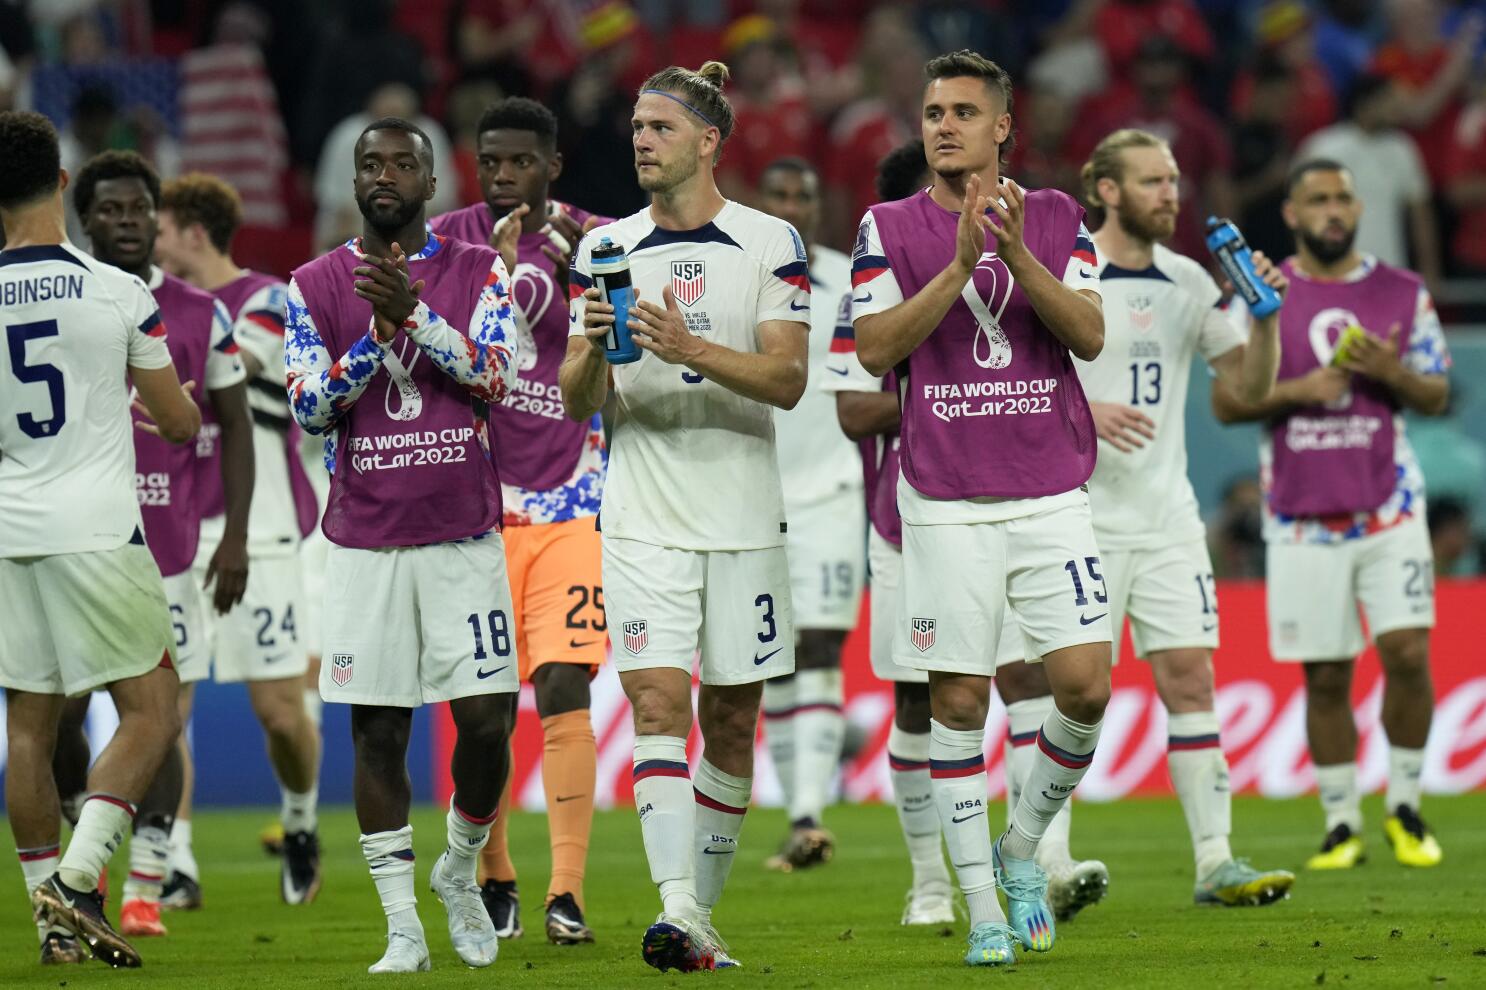 World Cup 2022: USMNT's kit confirmed for Qatar 2022 World Cup